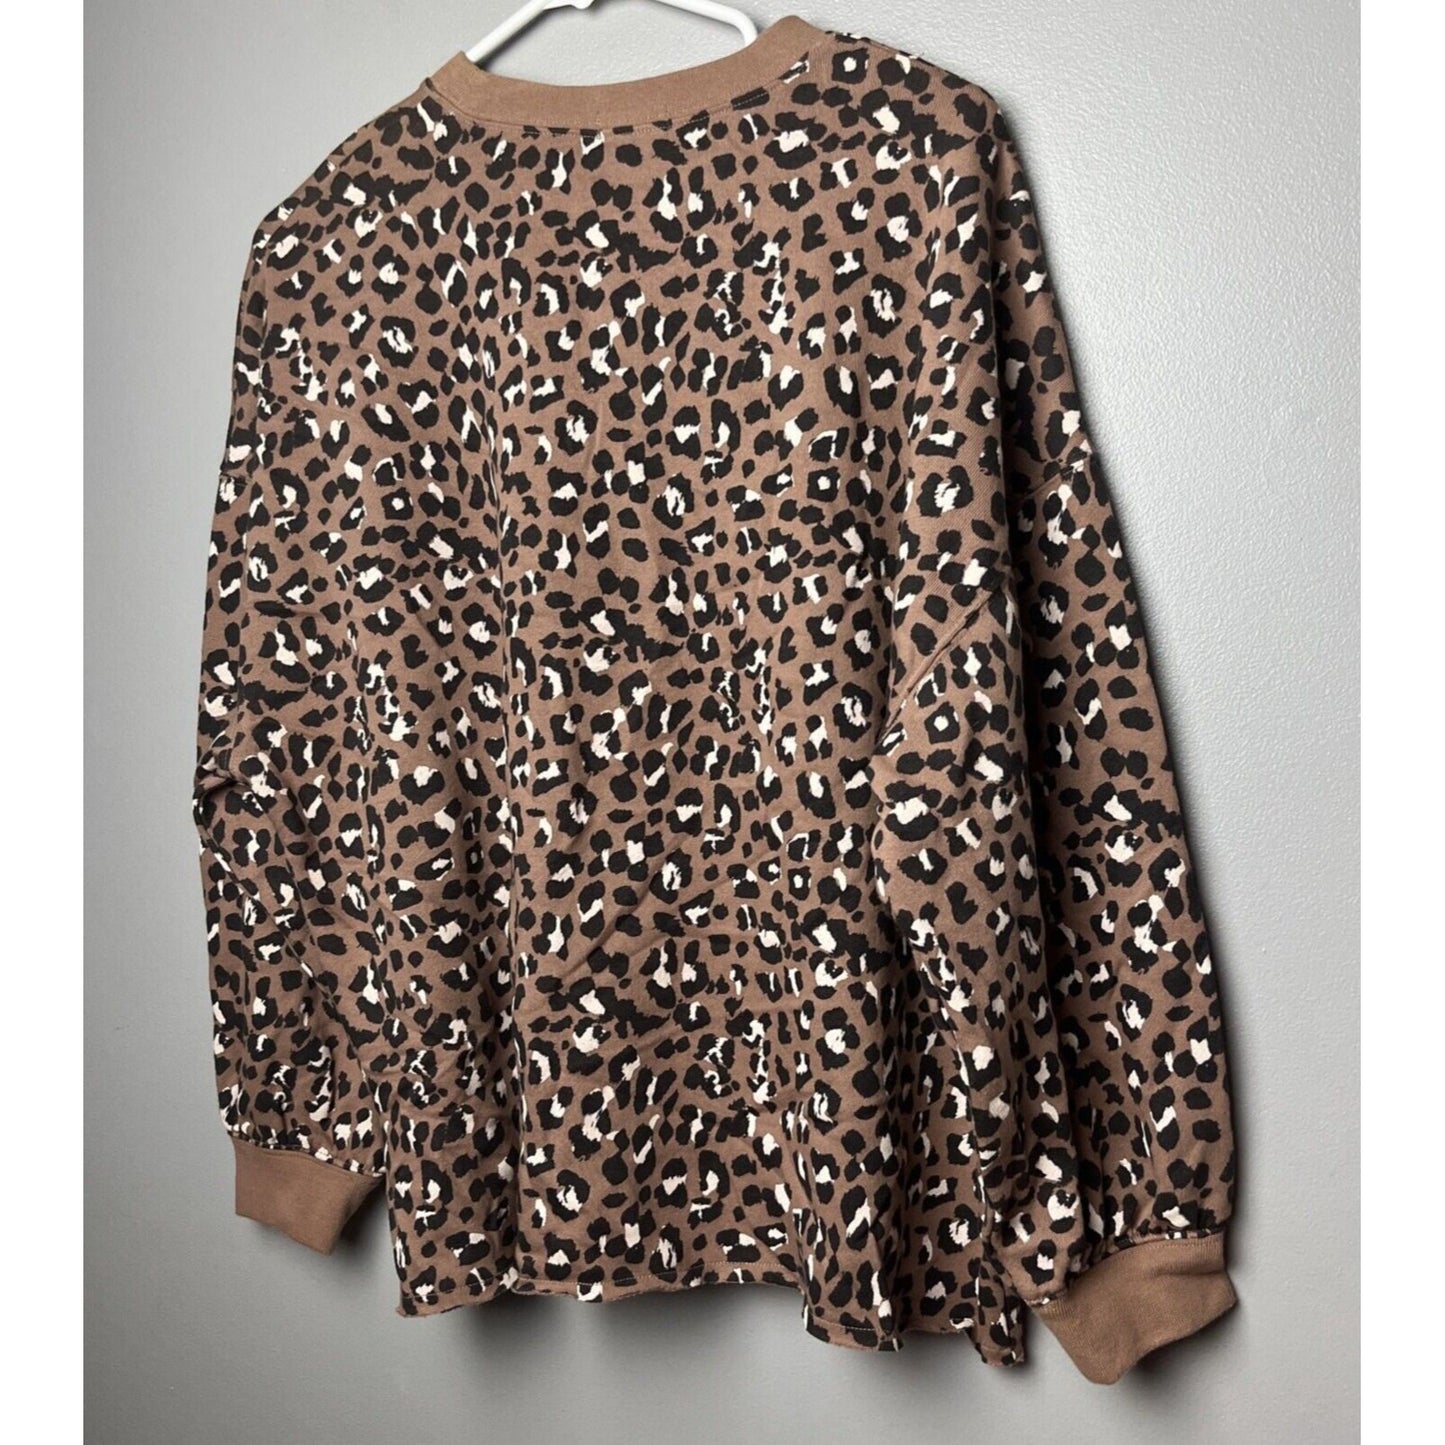 RAILS Sweatshirt Womens Small Reeves Mountain Leopard Crew Neck Pullover NWT